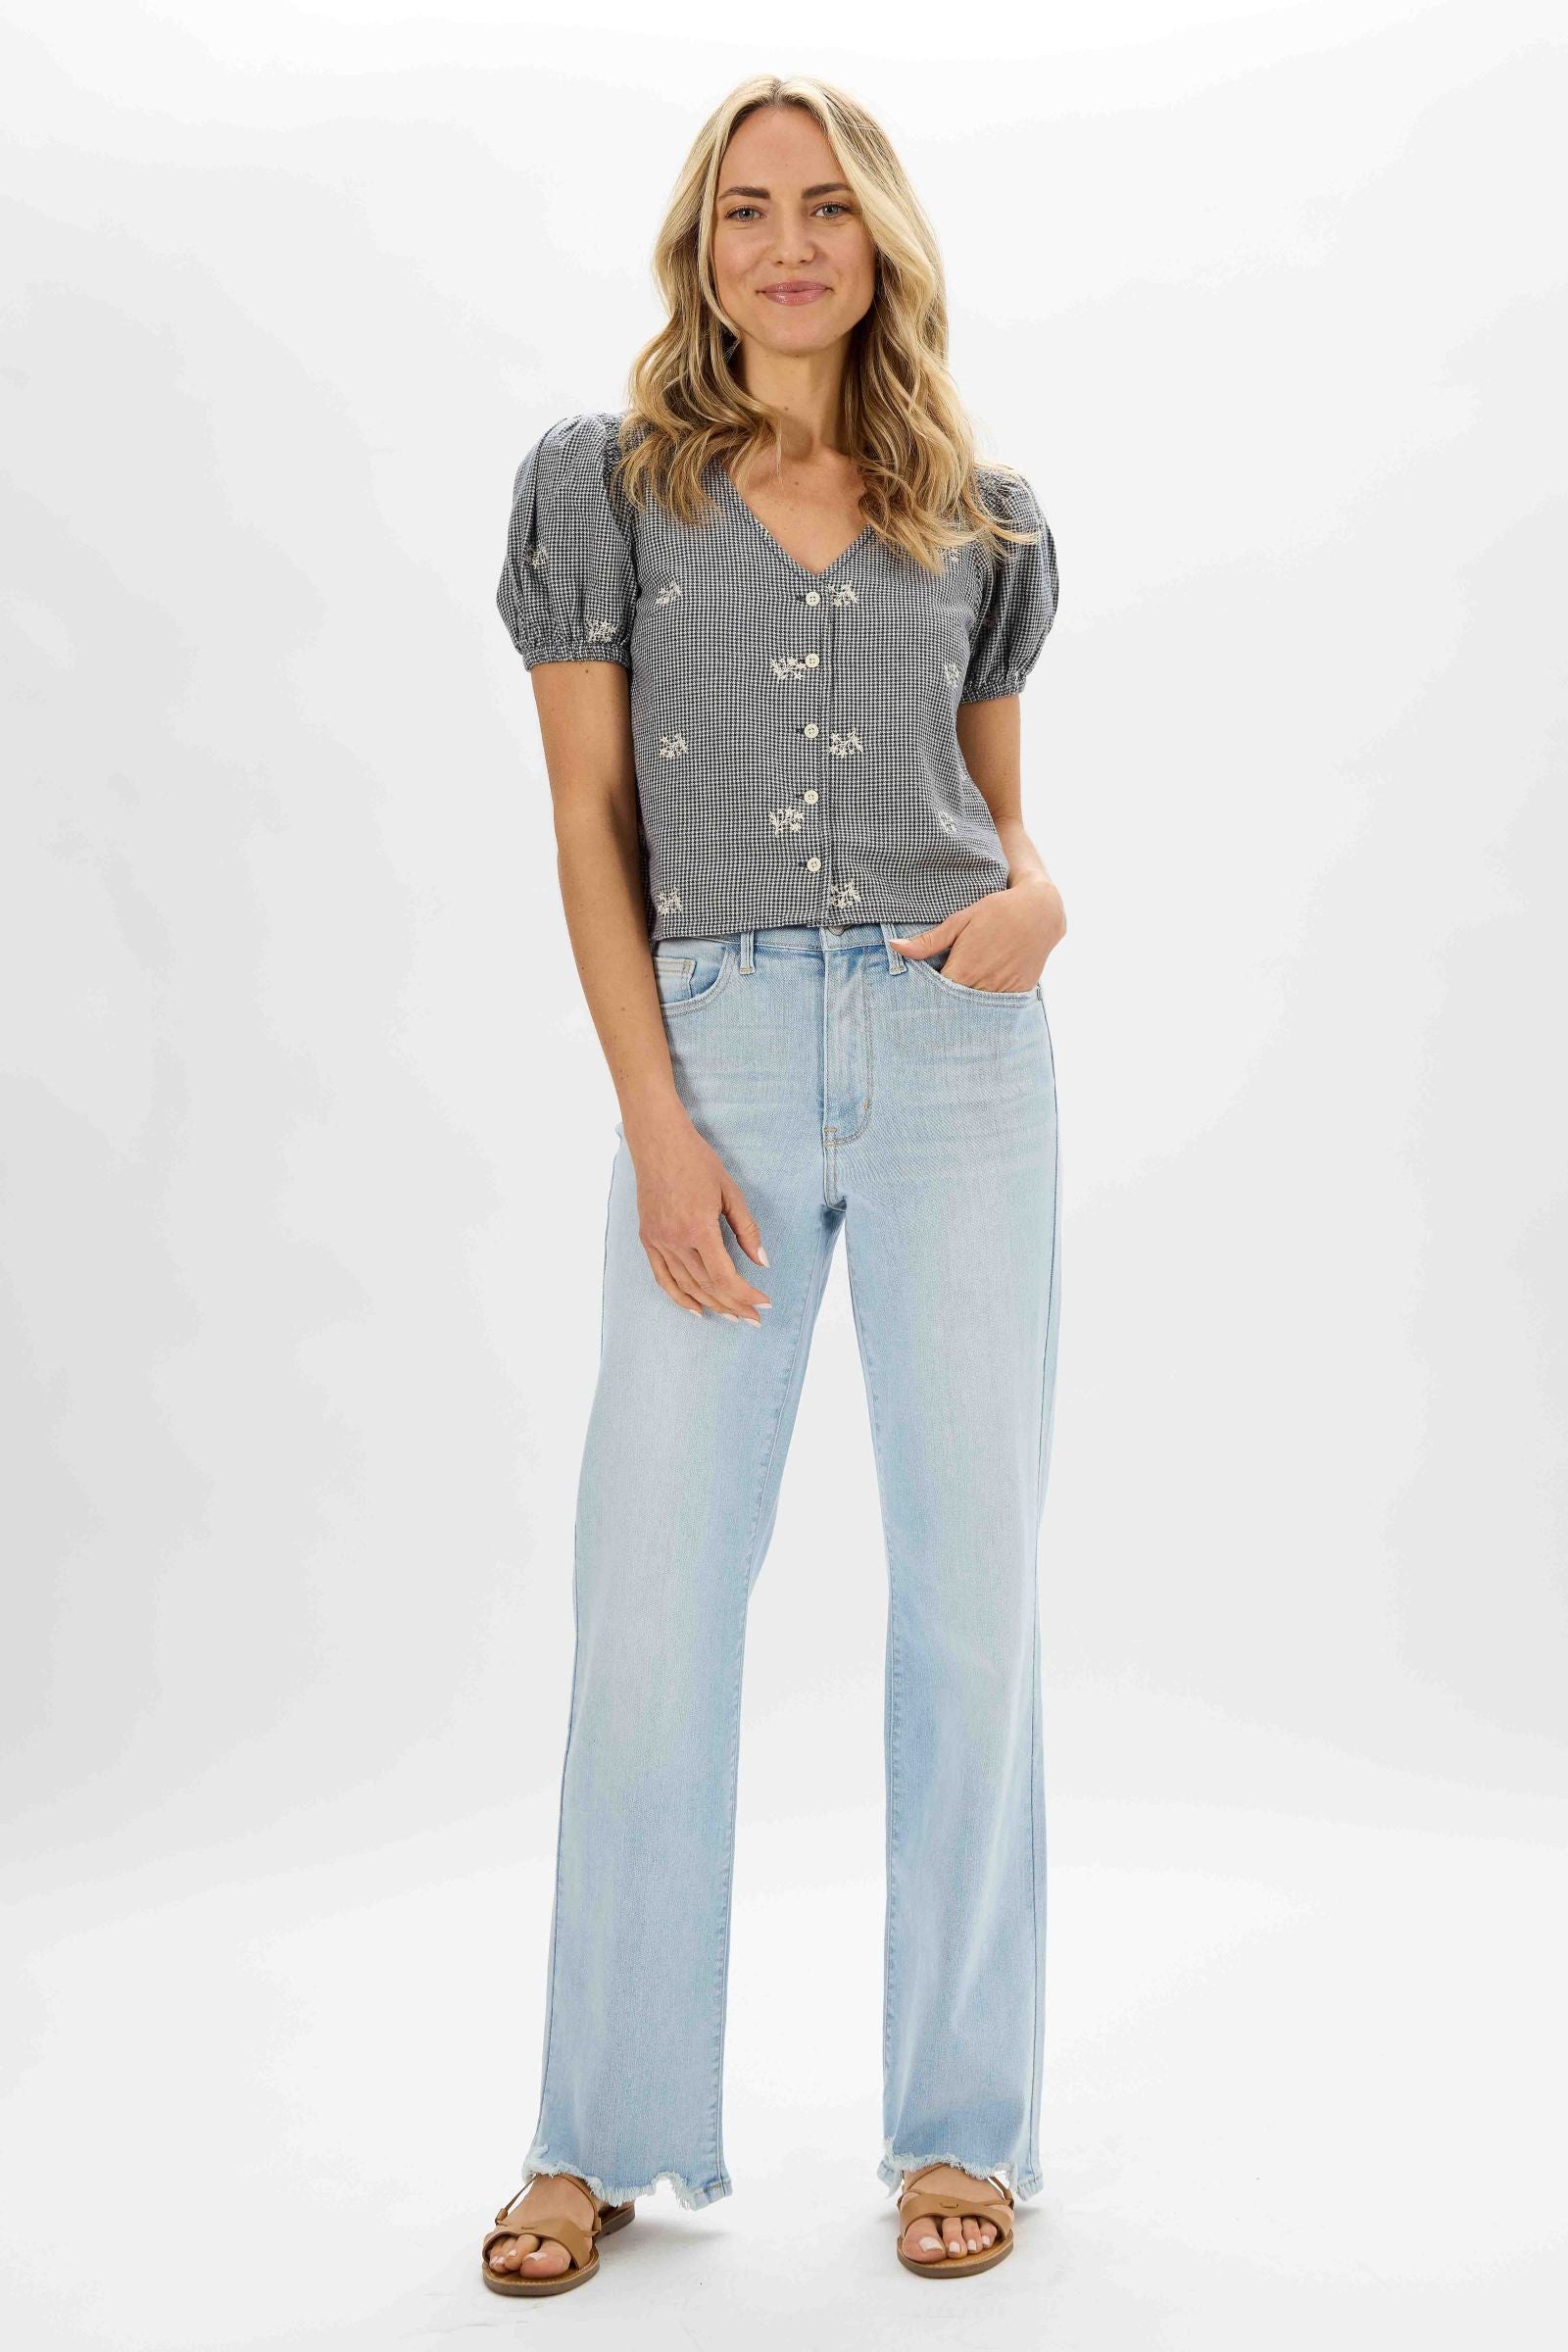 Judy Blue Light Wash High Rise Straight Jeans